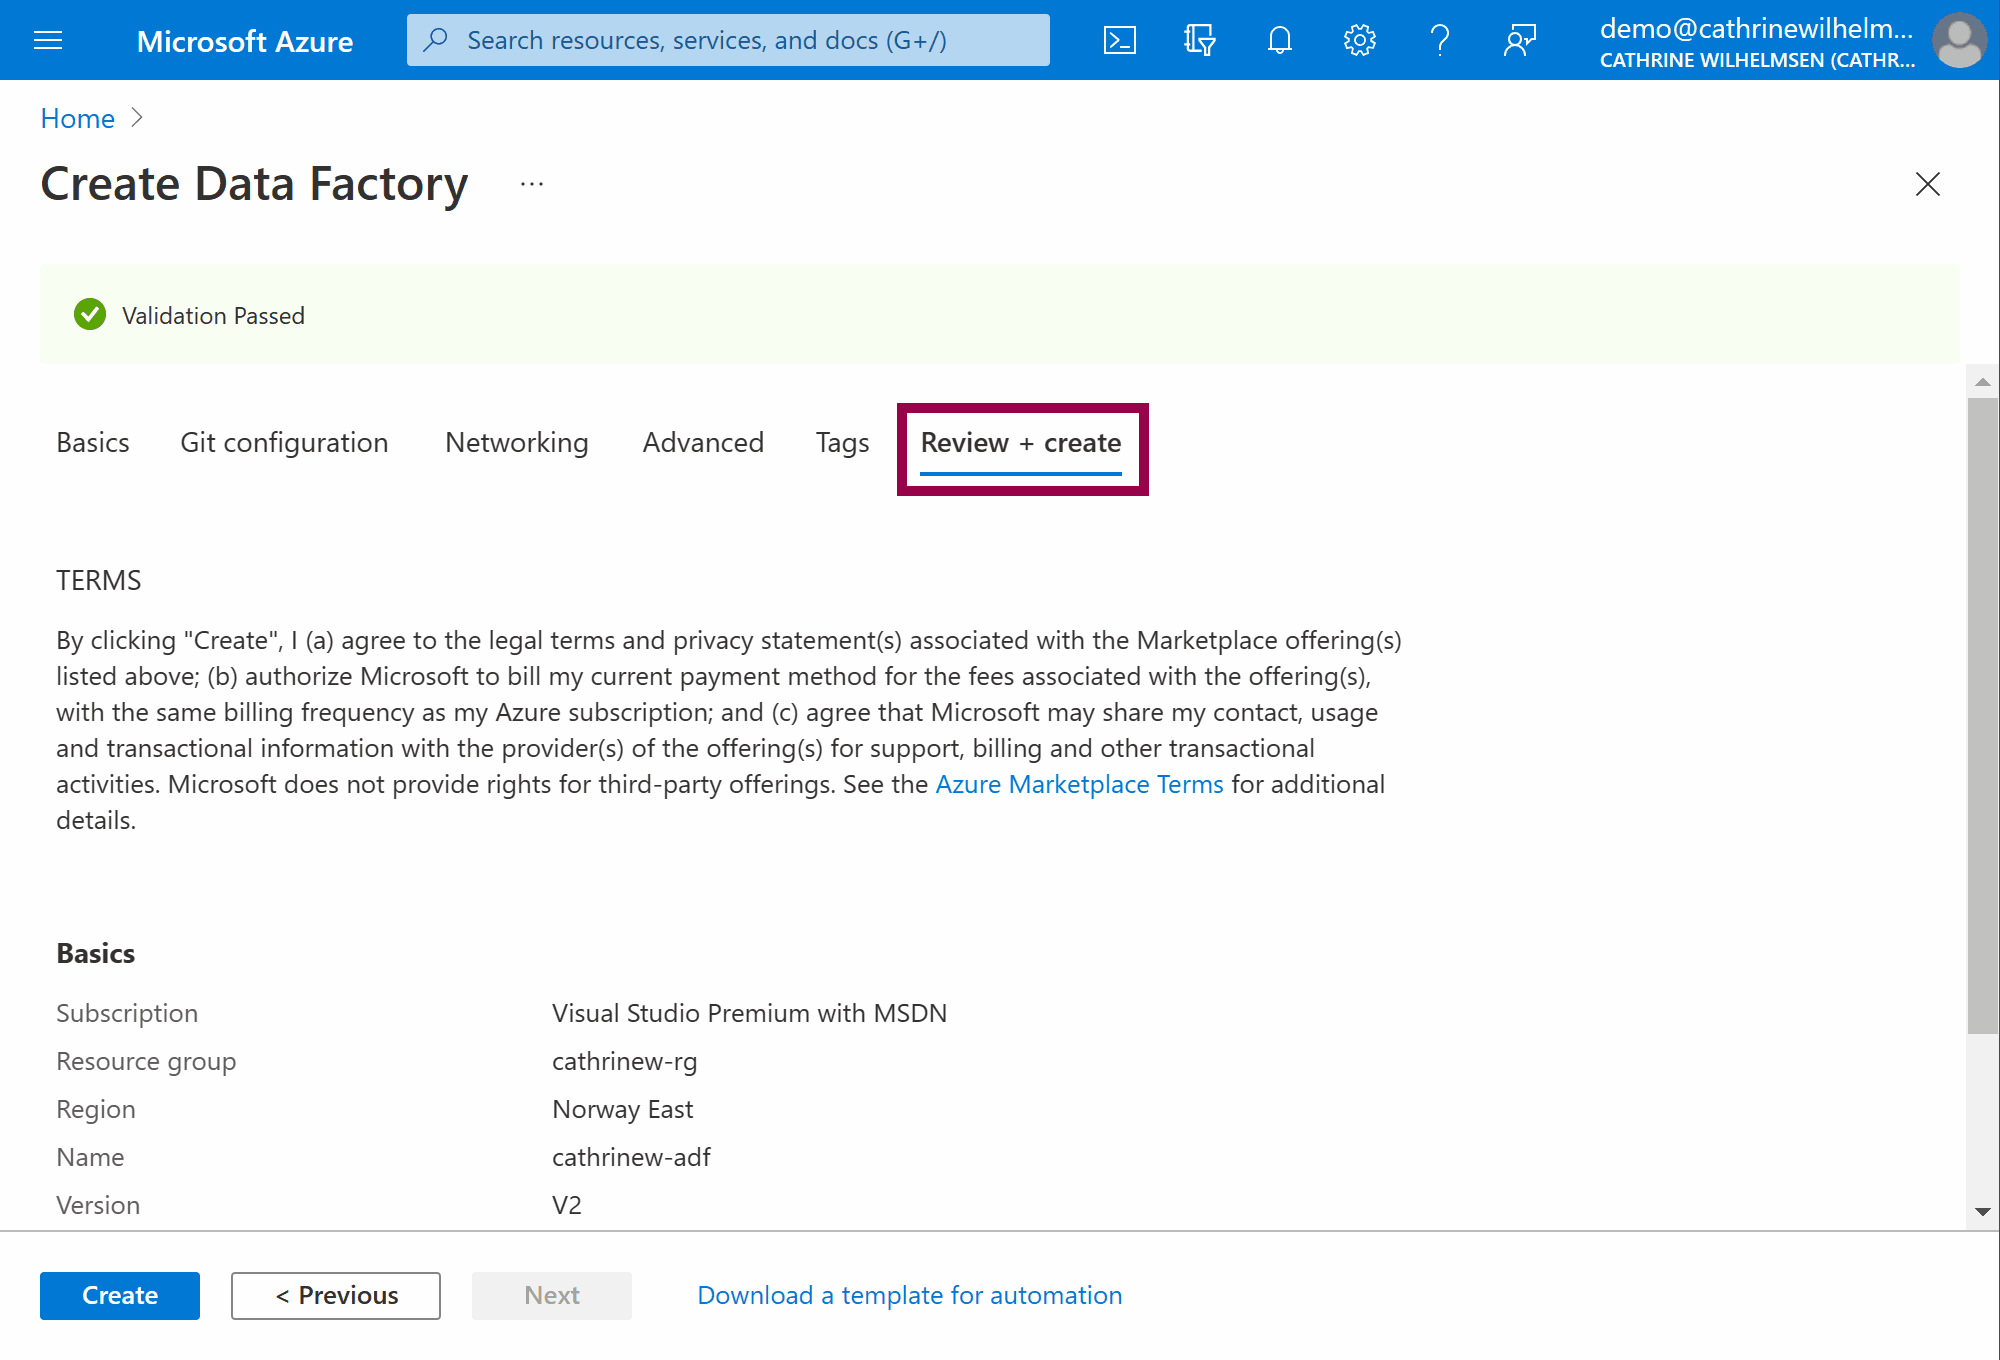 Screenshot of the Create Data Factory: Review and Create page in the Azure Portal